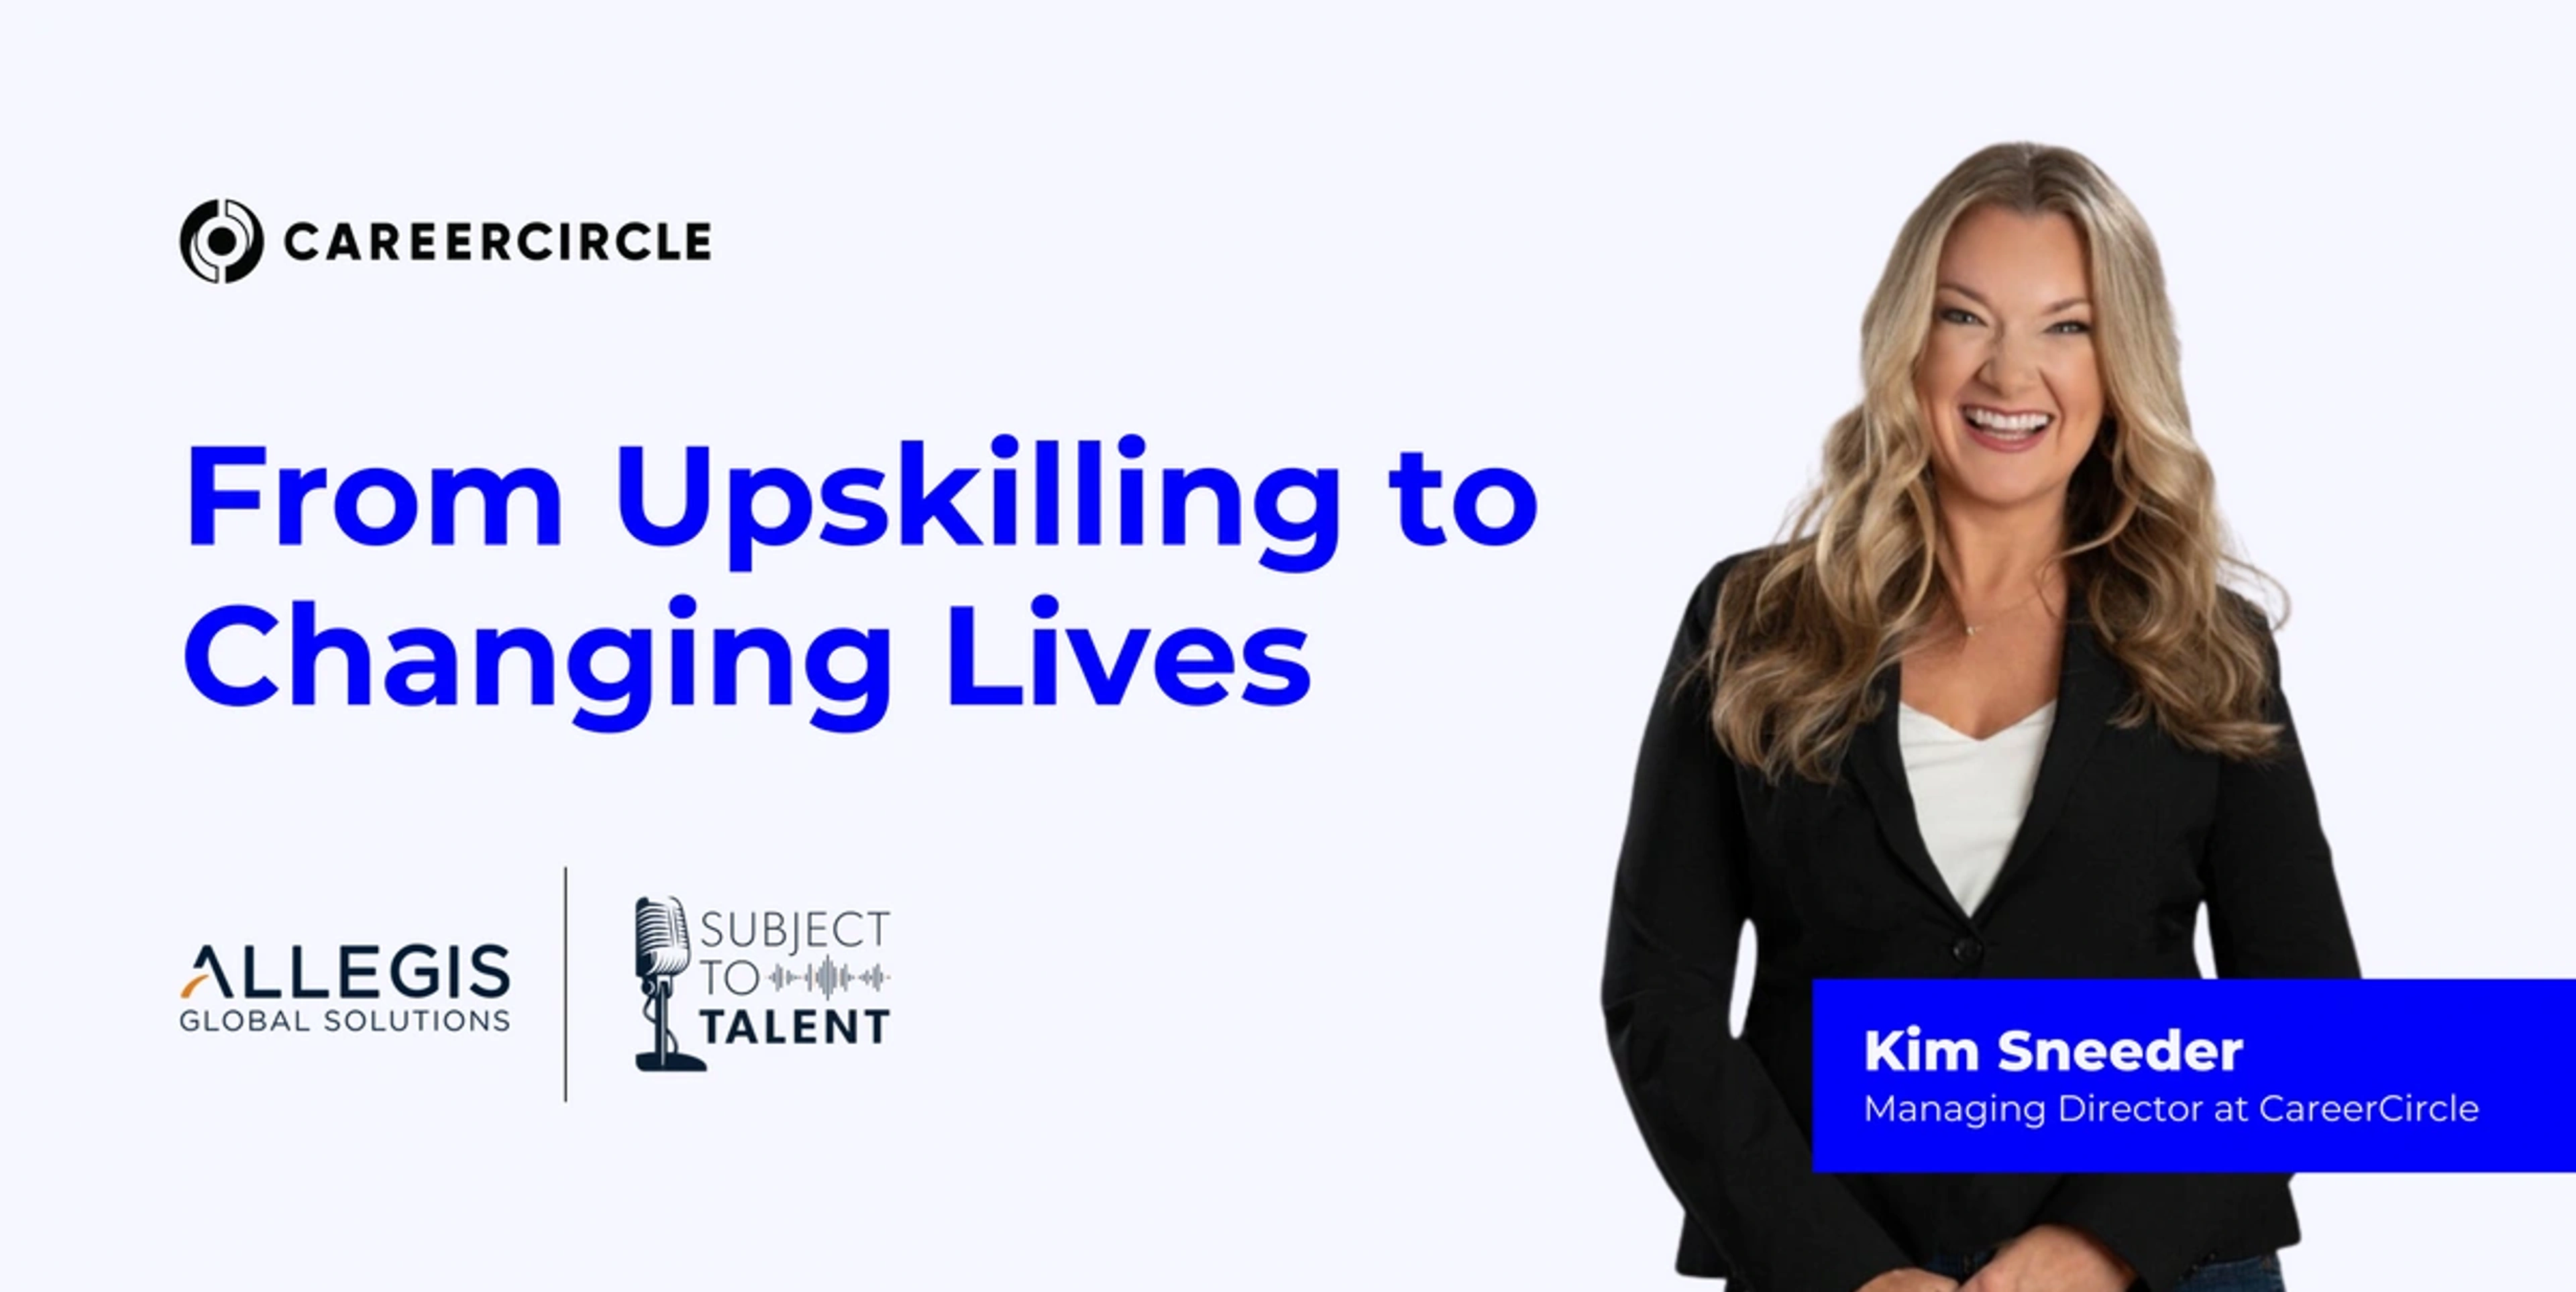 Kim sneeder is on the banner with text that says "from upskilling to changing lives"